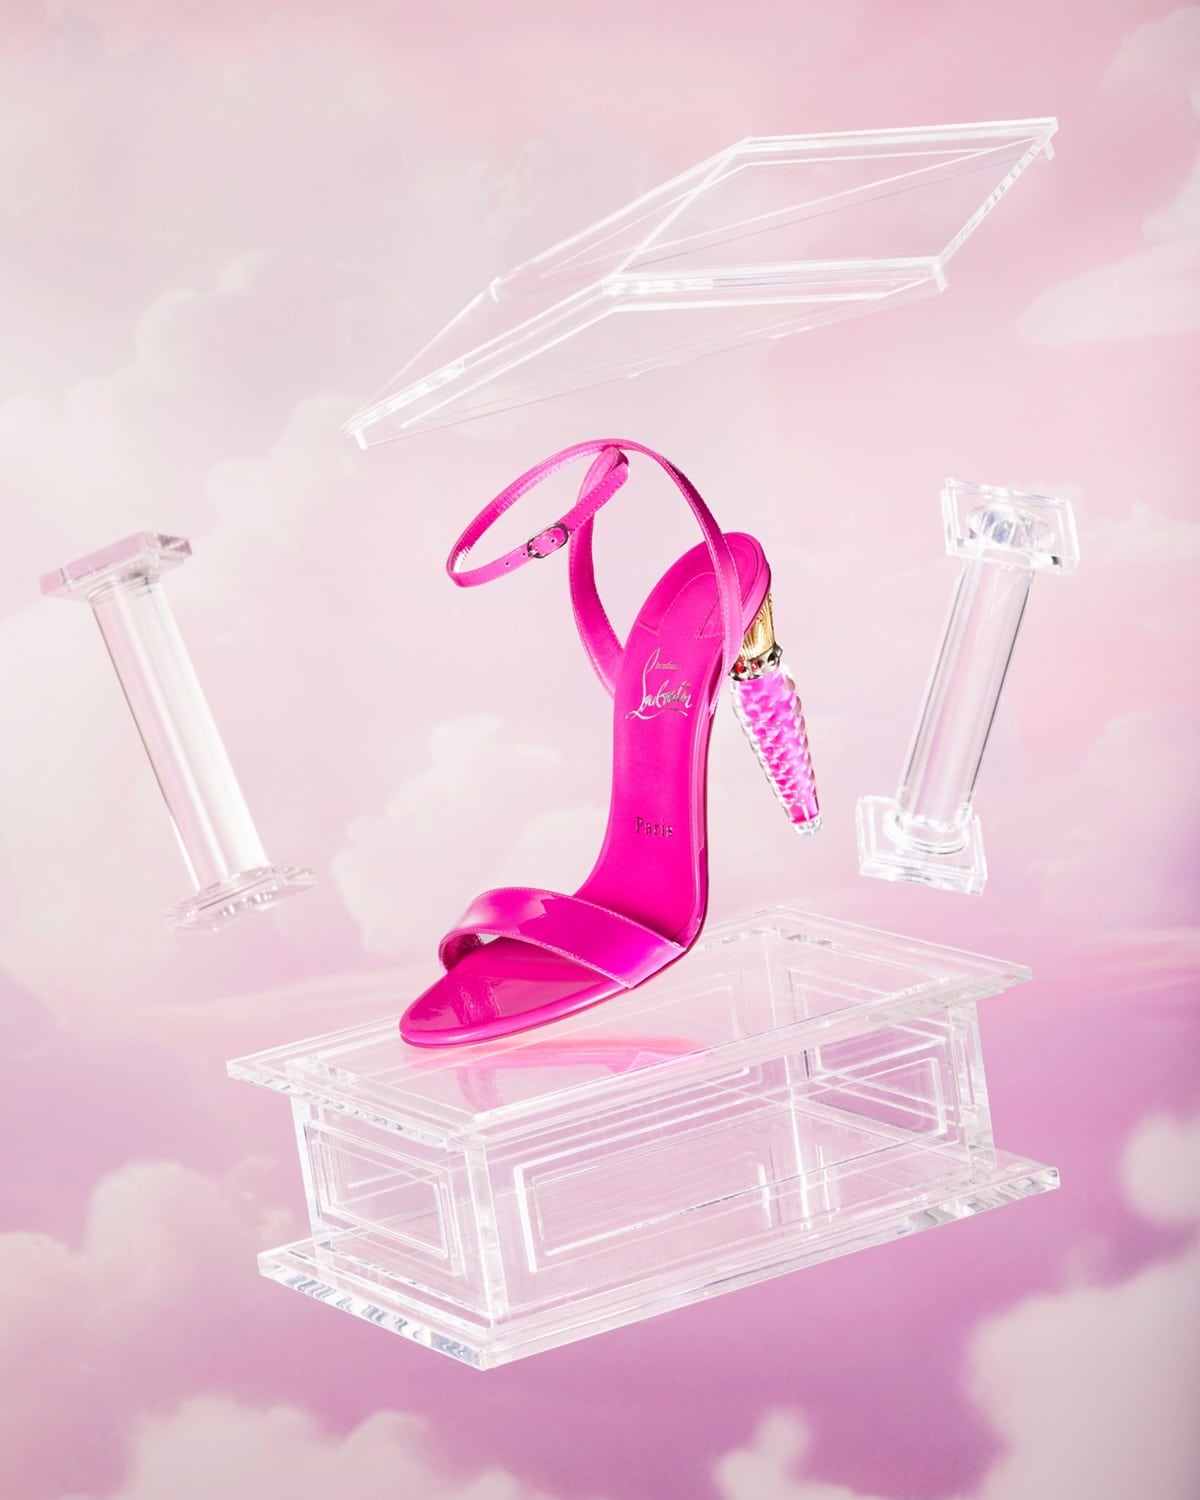 Radiating a luminous charm, the pump is adorned in Bolerose pink patent leather, creating a stunning visual effect